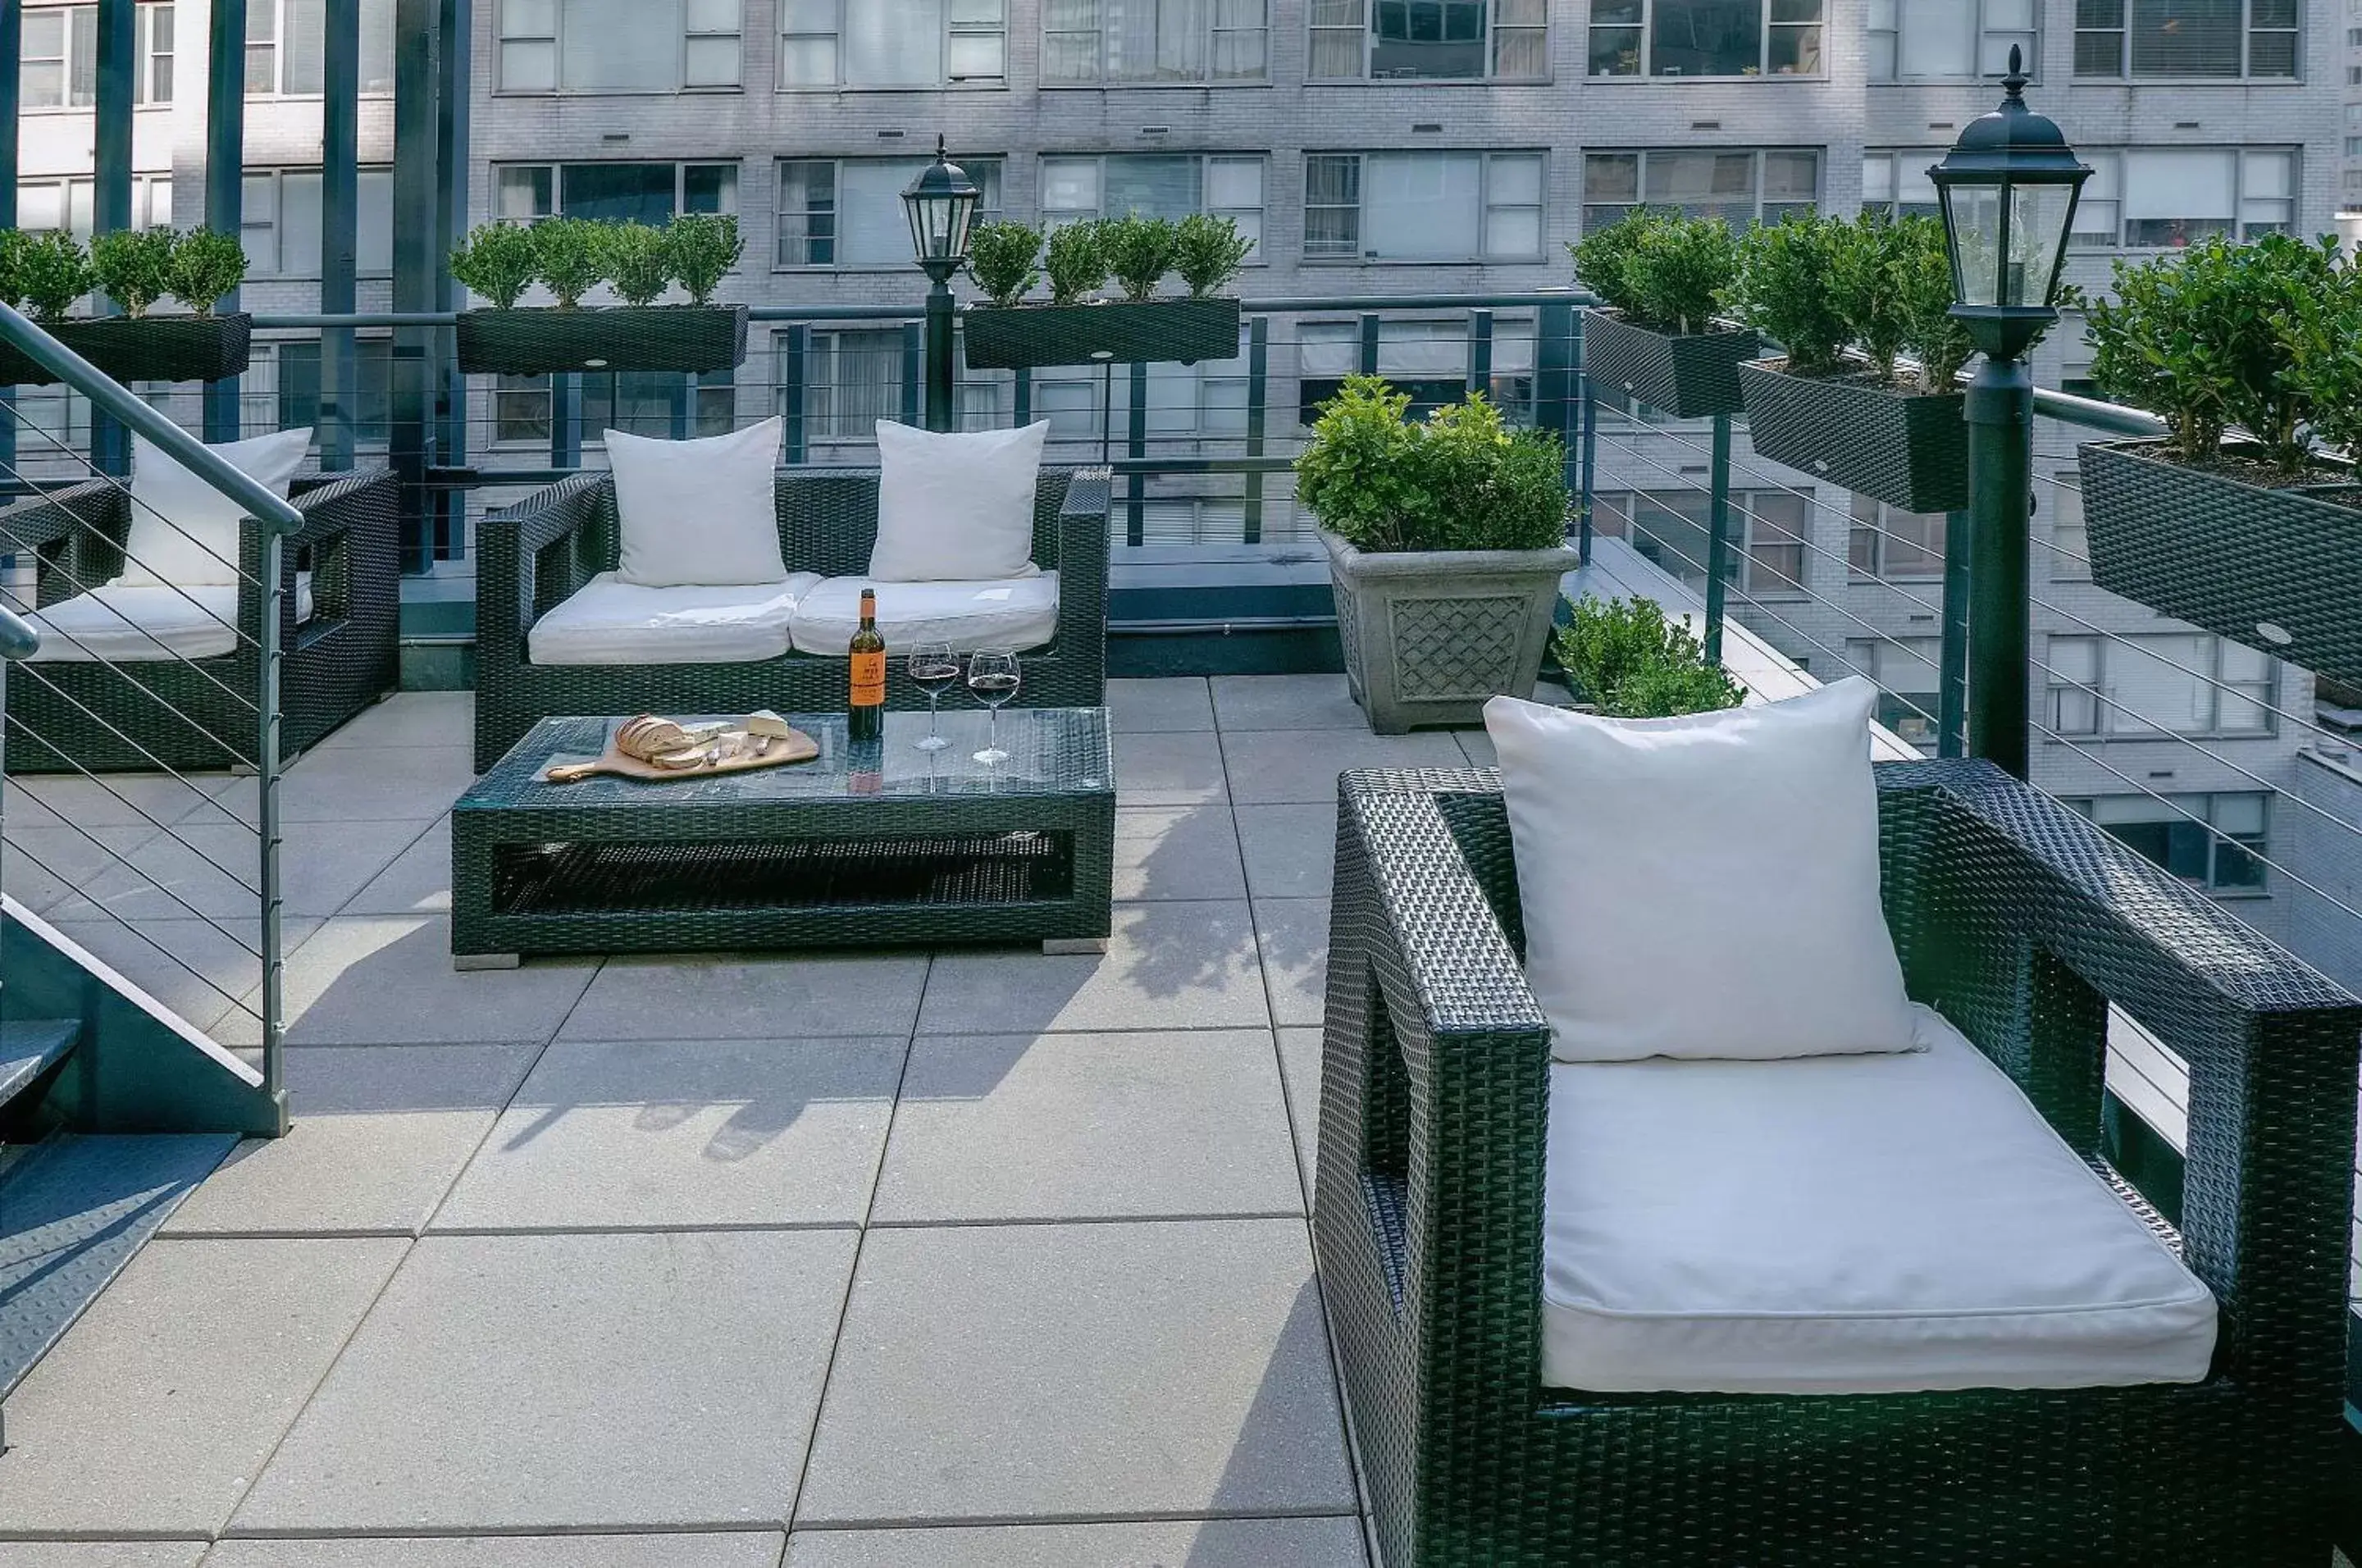 Balcony/Terrace in The Historic Blue Angel Hotel Lexington Ave, Ascend Hotel Collection